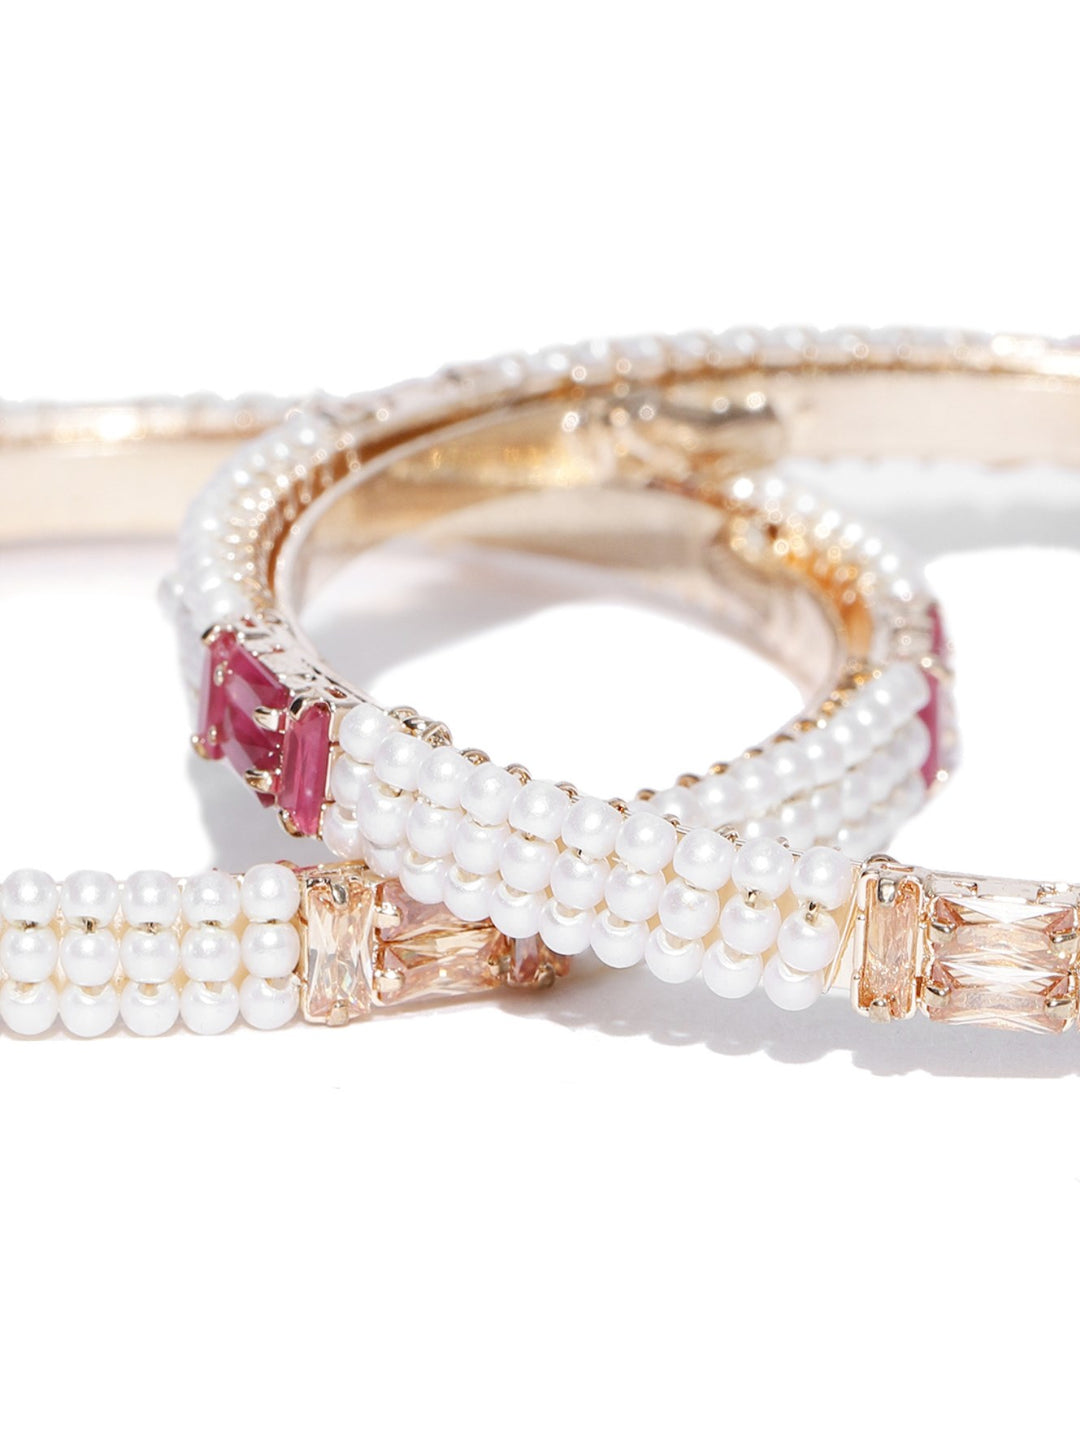 Set Of 2 Gold-Plated Pearls and Stones Studded Bangles in Pink and White Color